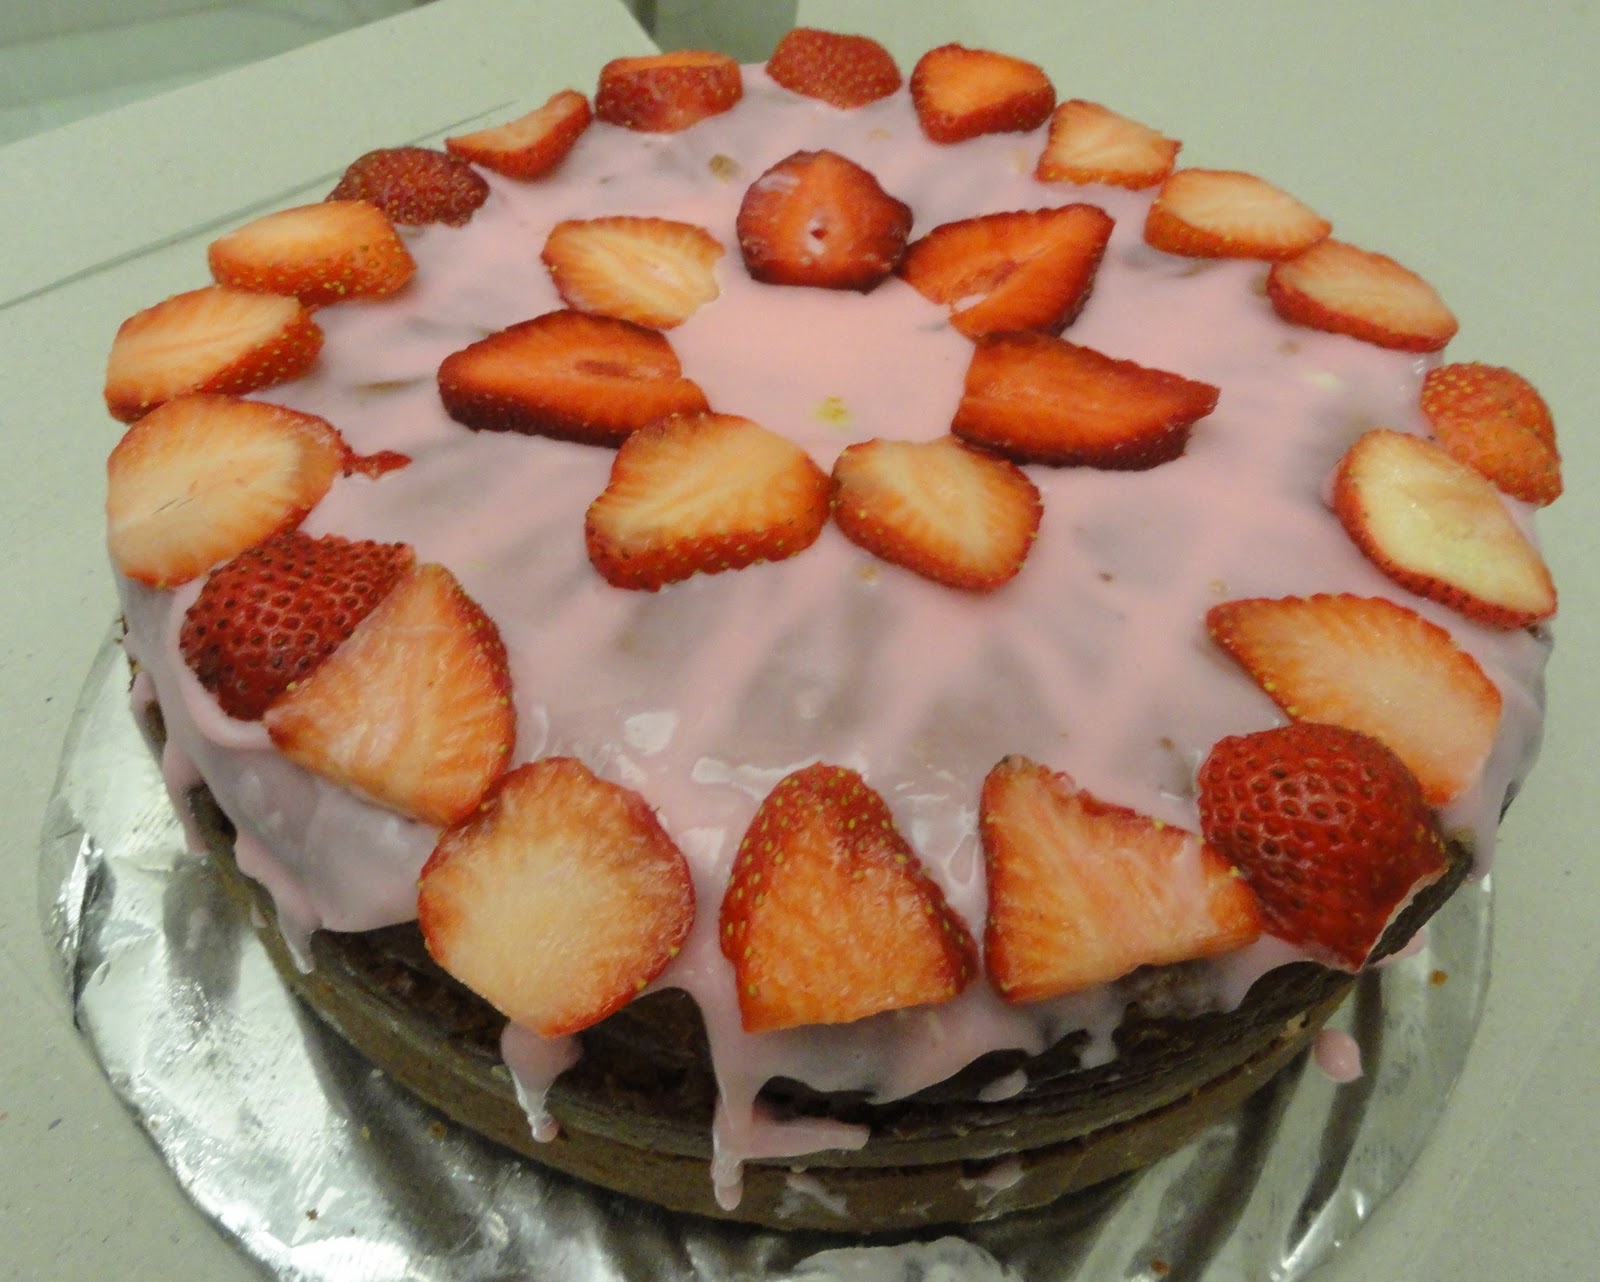 chocolate cake with chocolate frosting and strawberries  Vanilla Sponge Cake with Strawberries and White Chocolate Icing